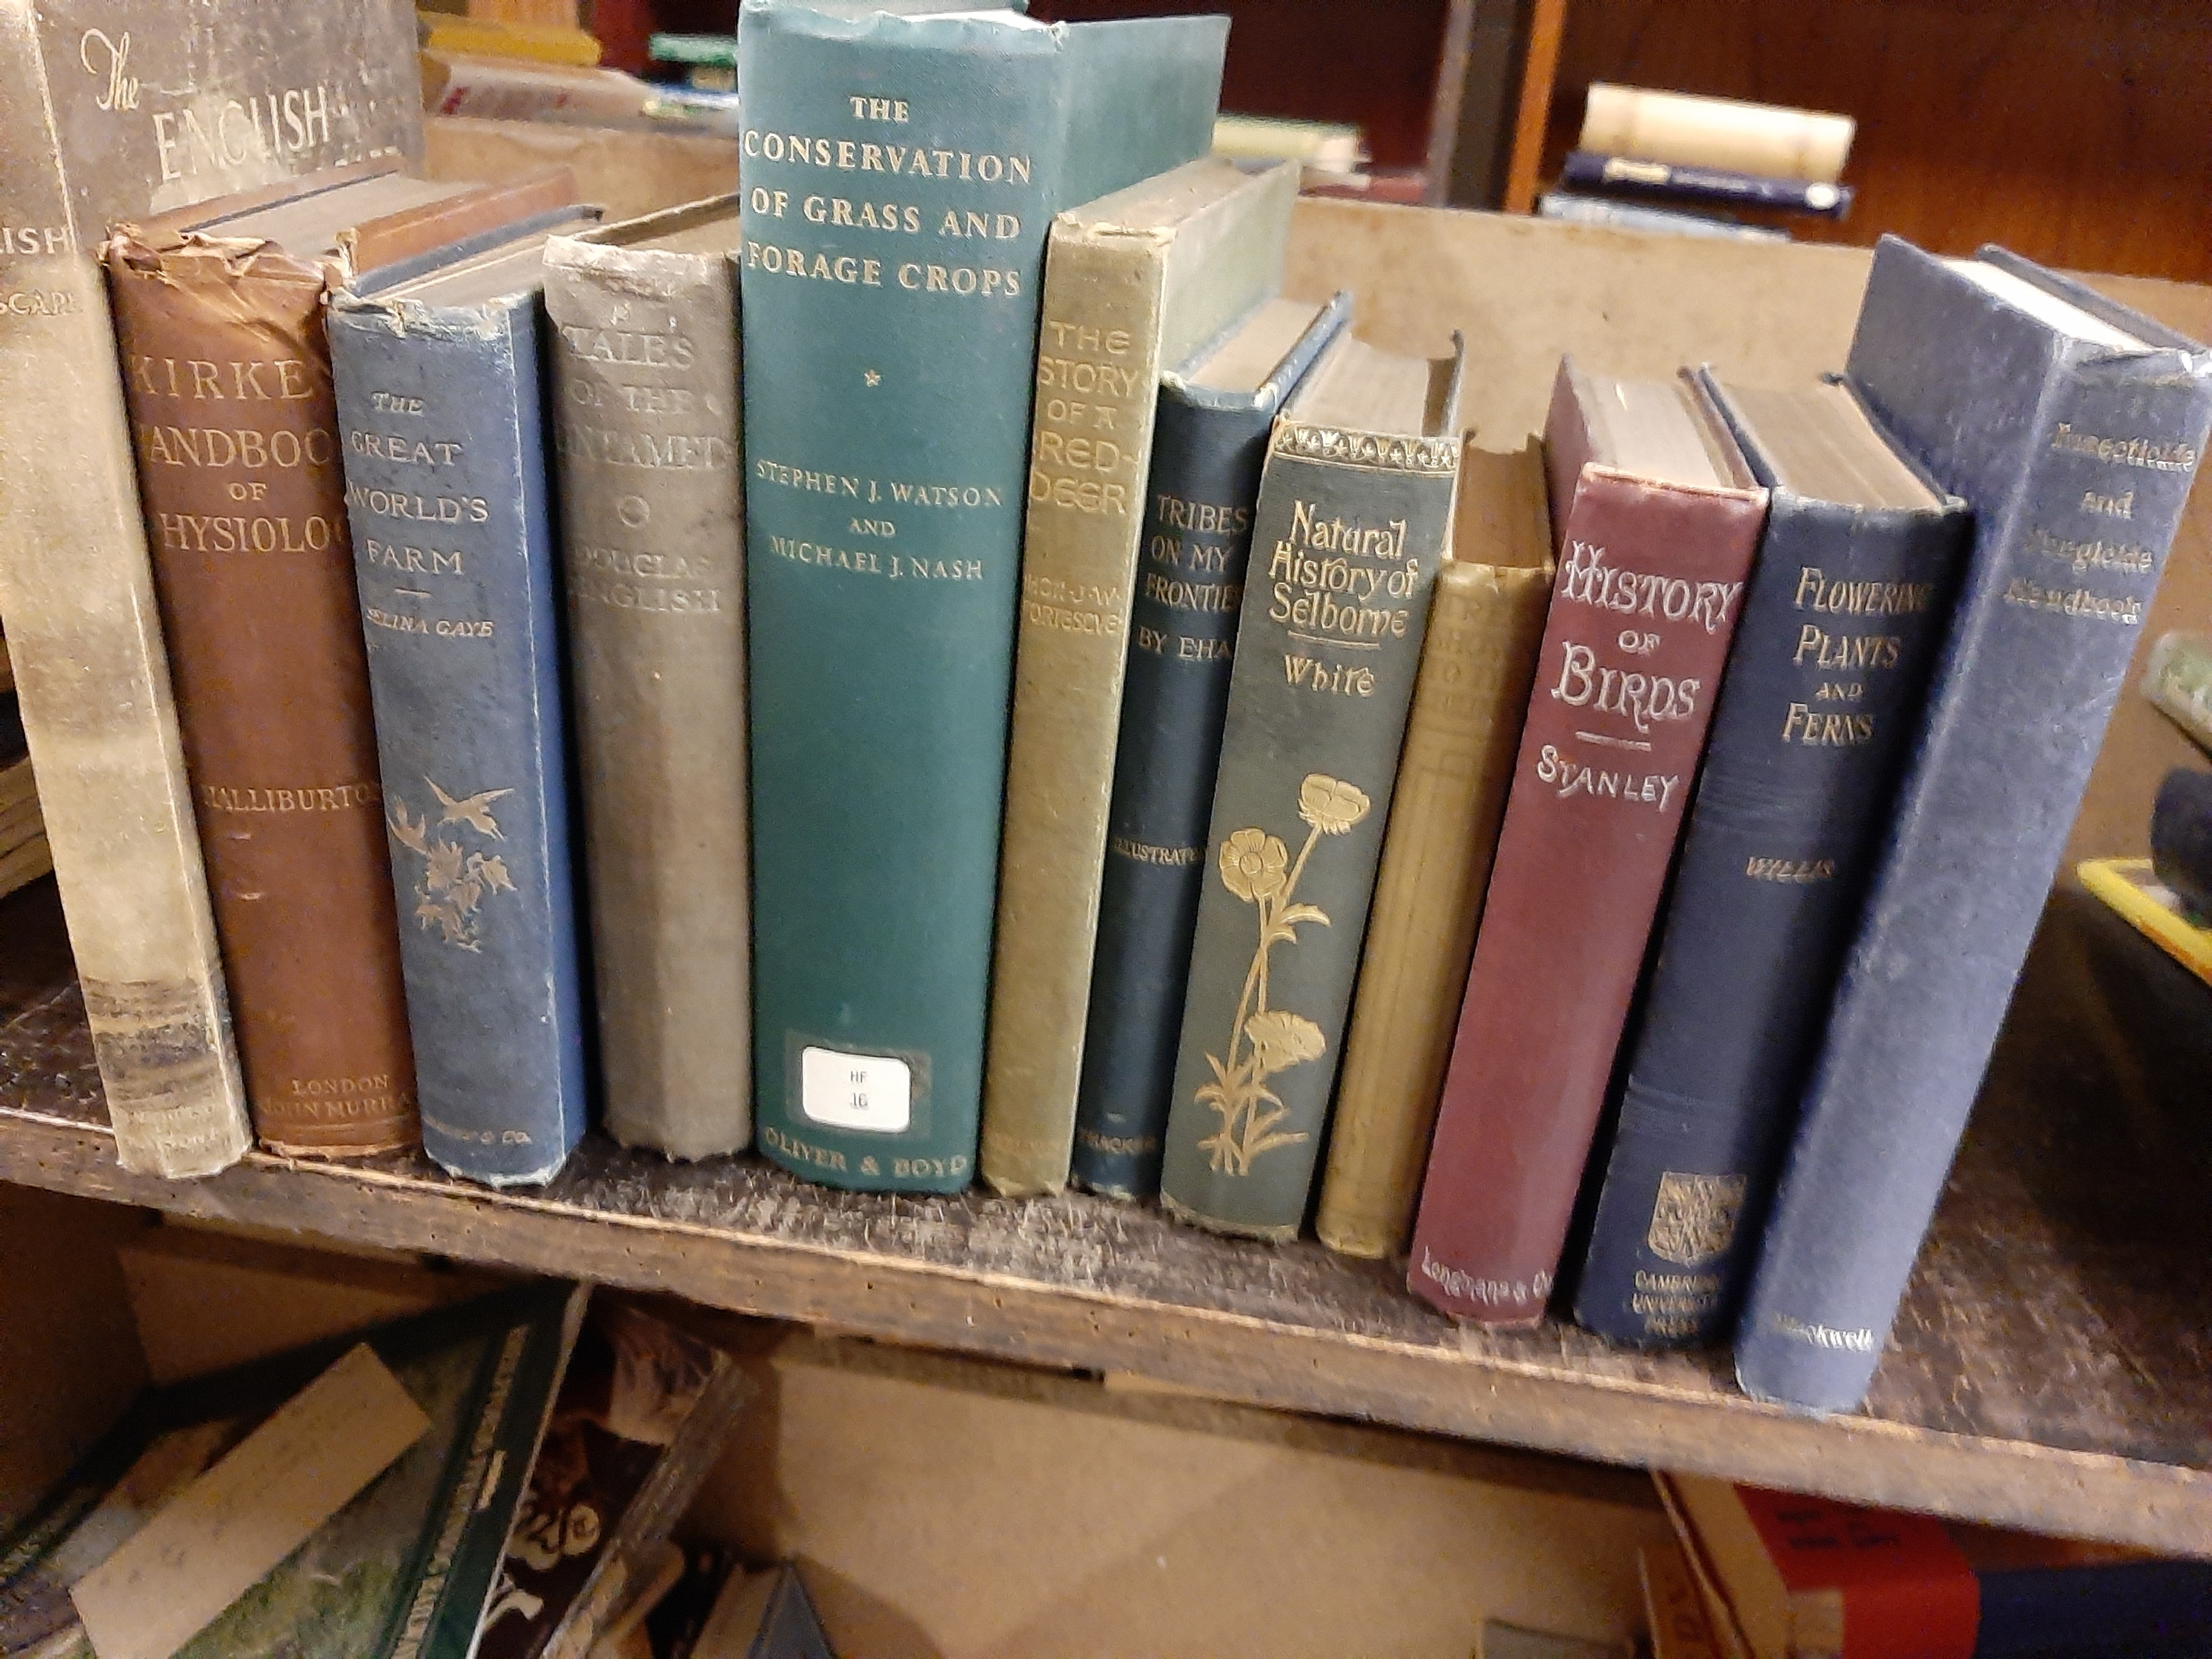 Approx 18 natural history related books including A Familiar History of Birds by Edward Stanley